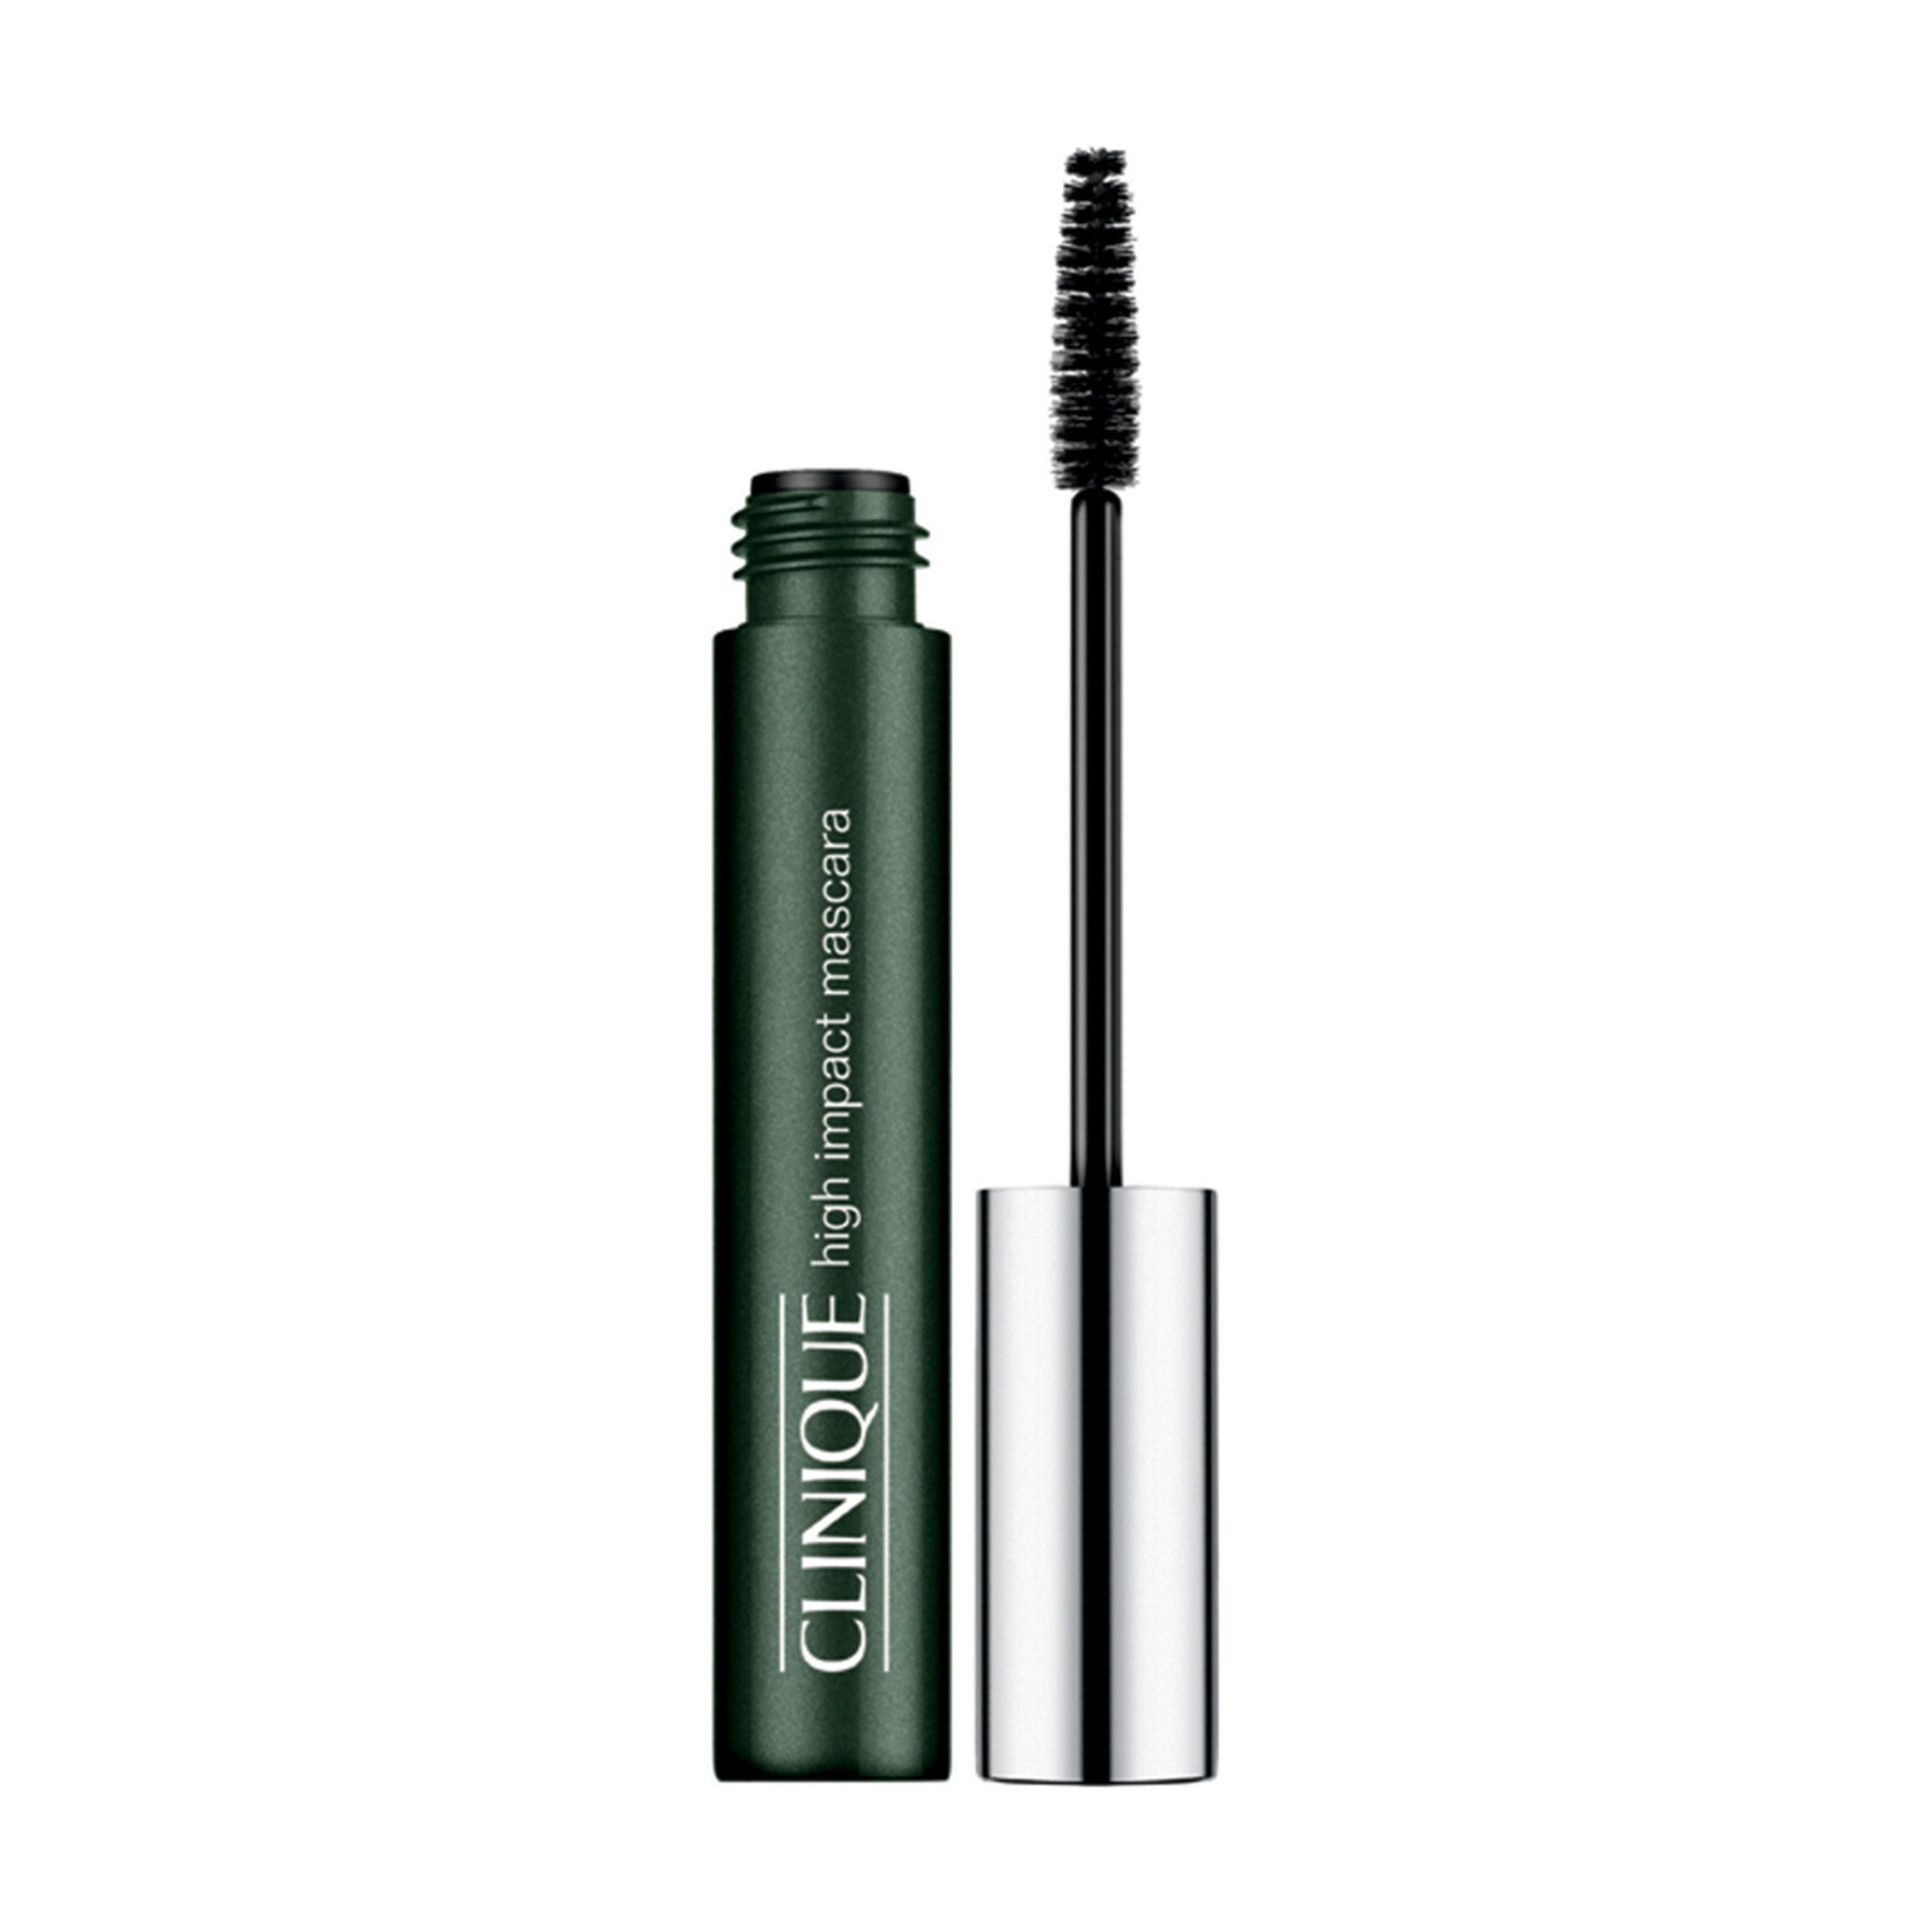 Clinique High Impact Mascara Color/Shade variant: Black / Brown main image. This product is in the color brown